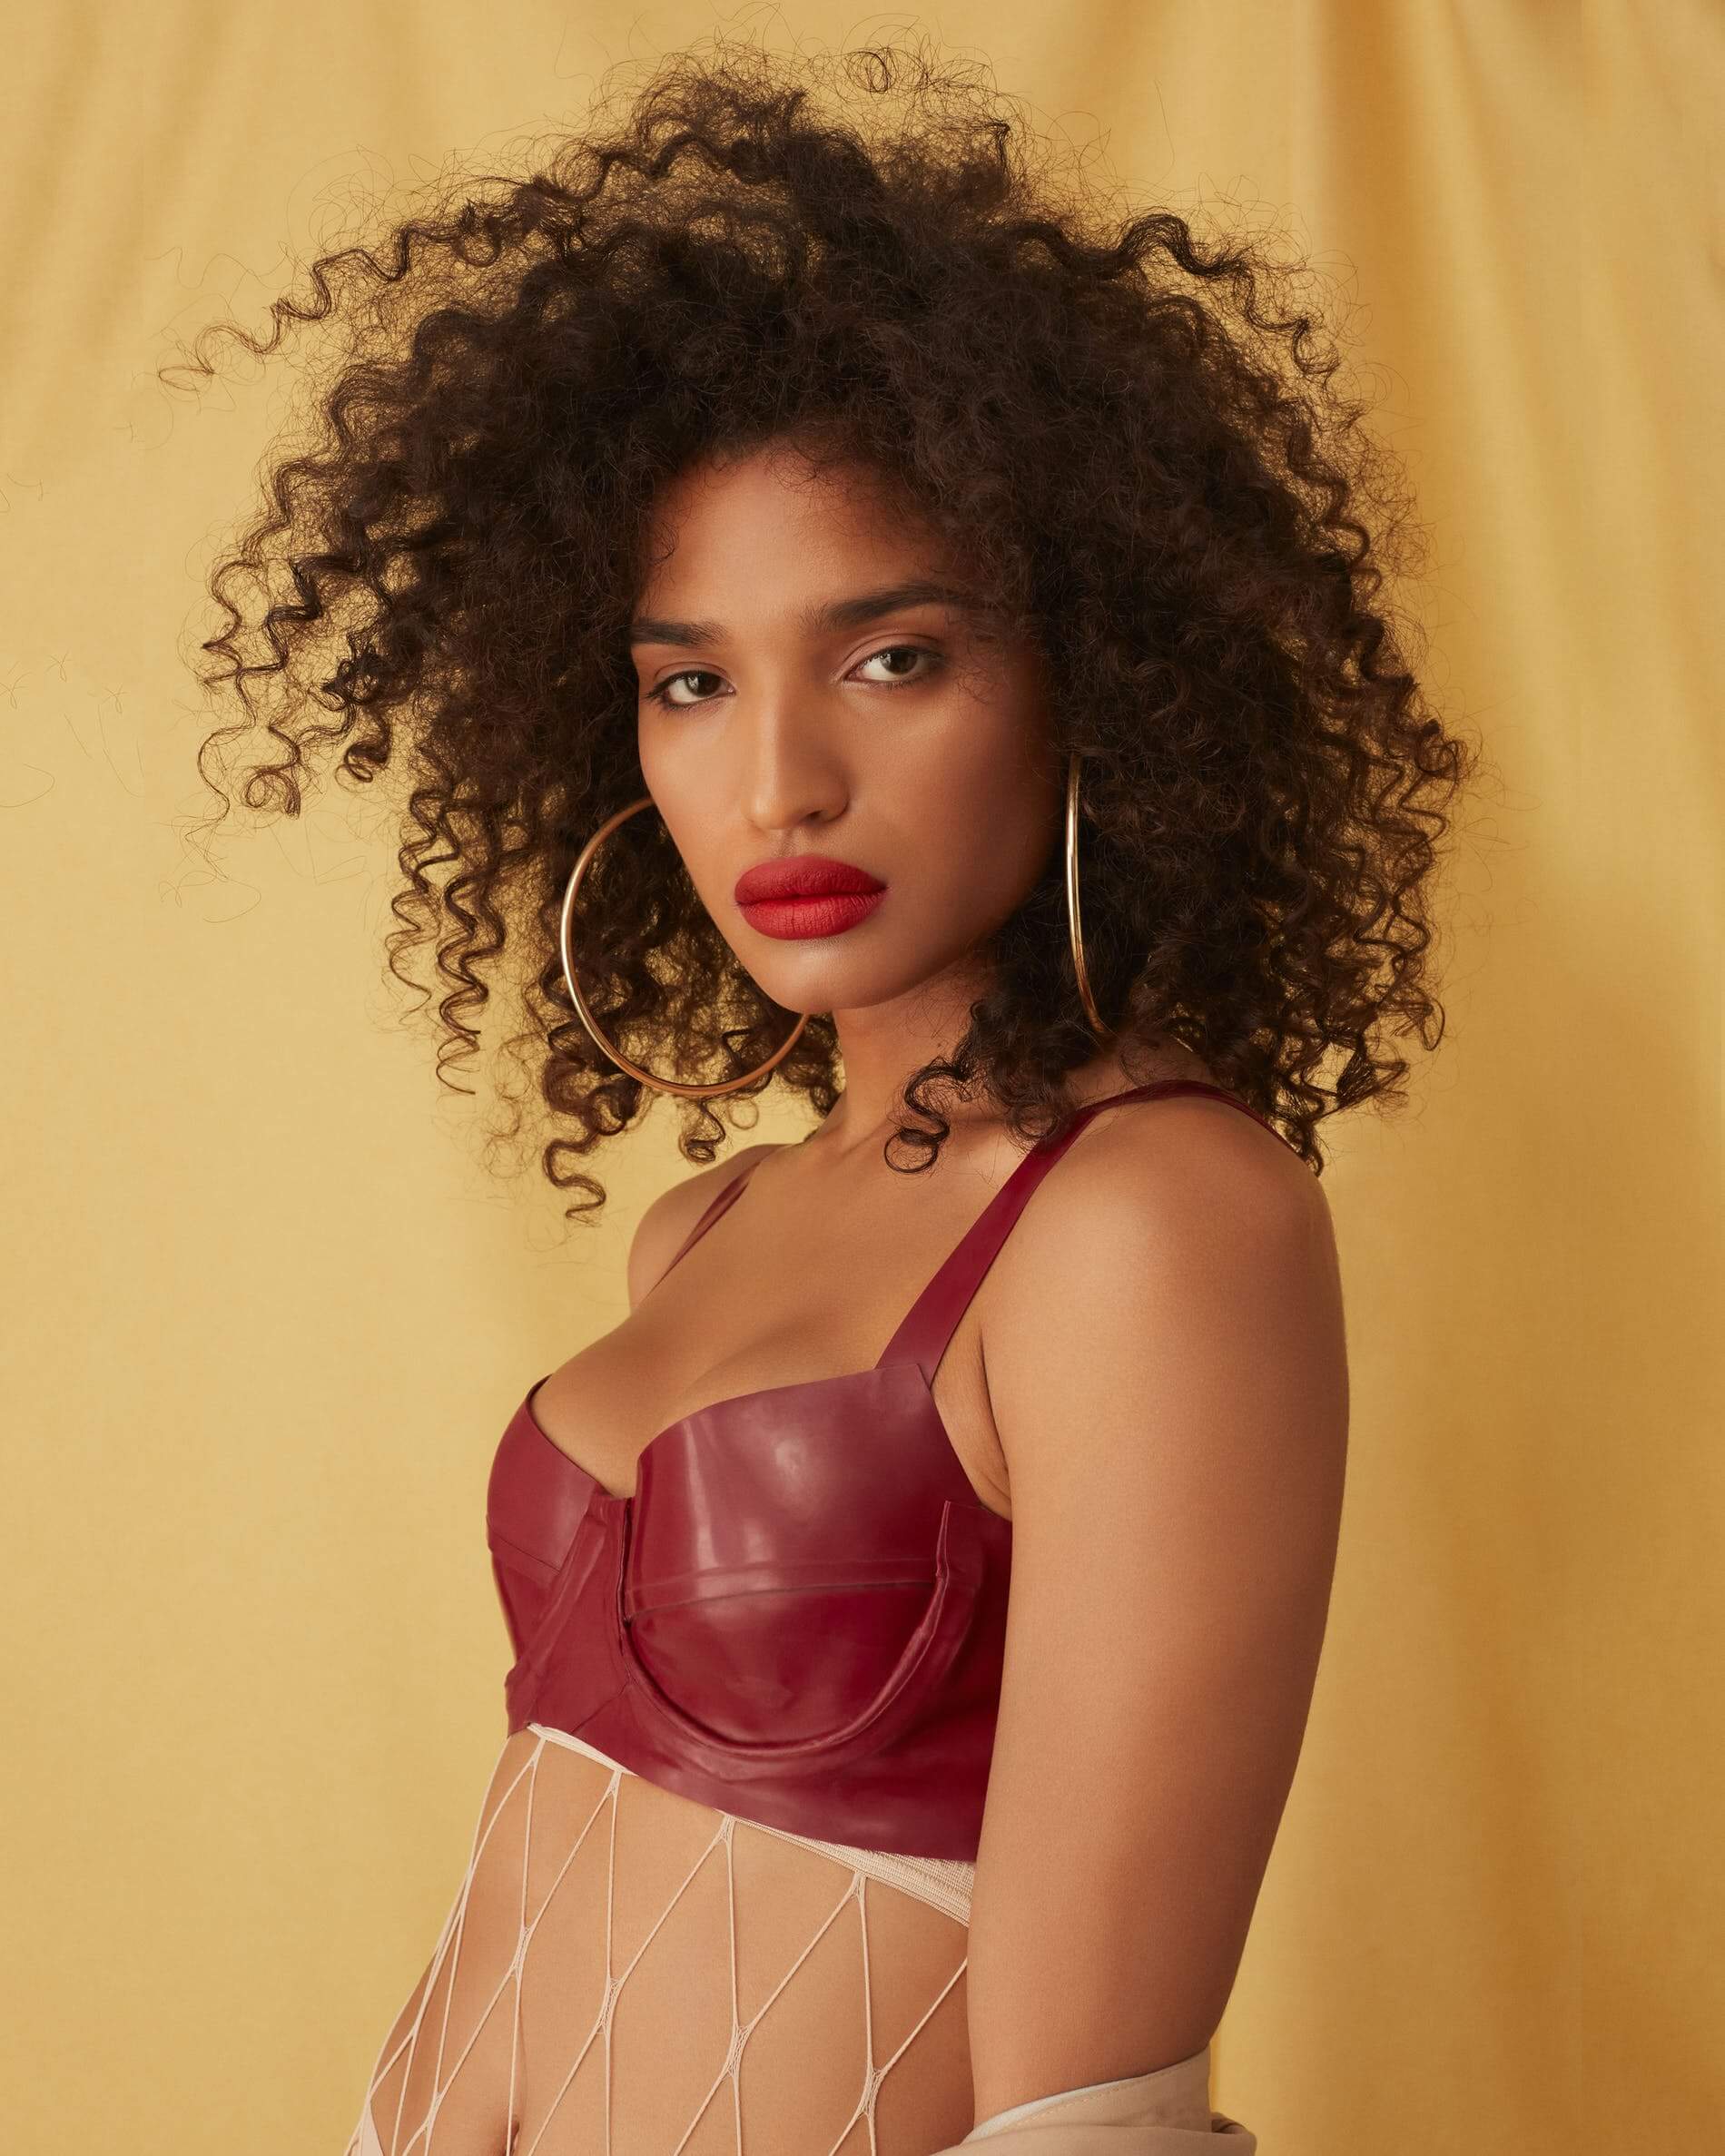 The Hottest Photos Of Indya Moore.